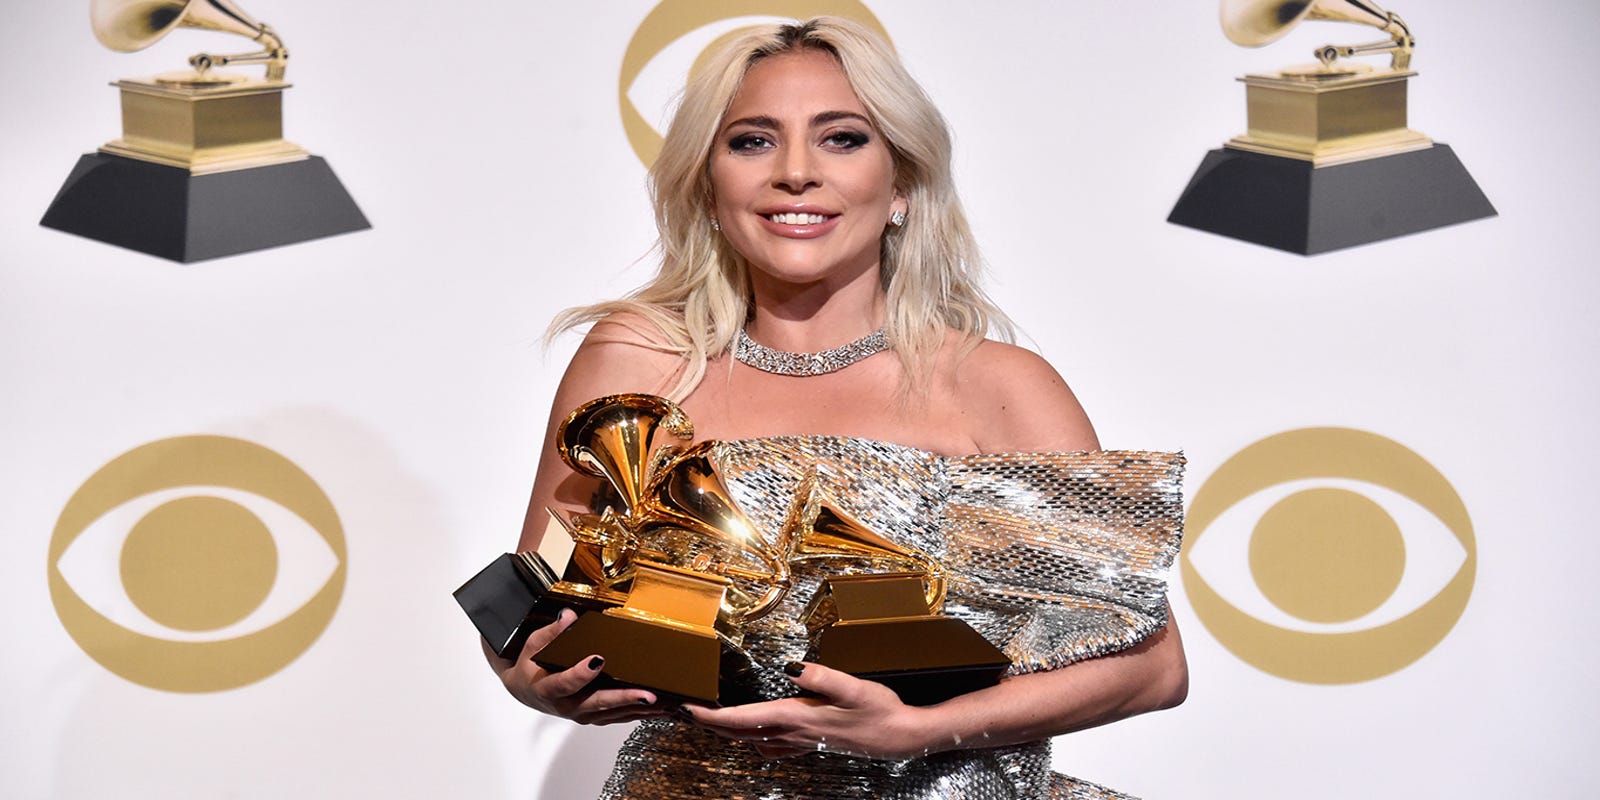 Grammys 2020: How to watch, who's performing, who was snubbed and more